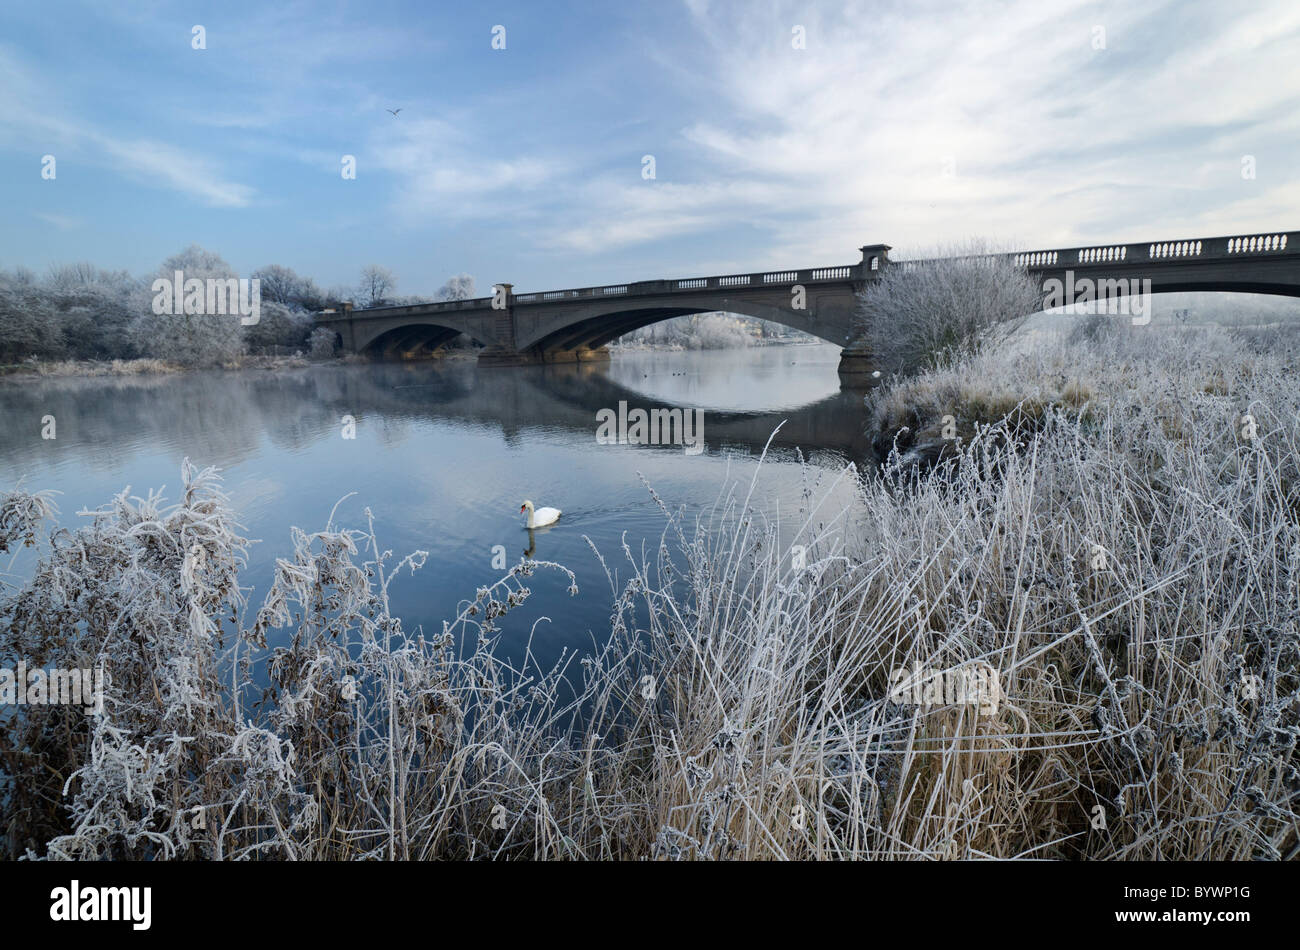 Gunthorpe Bridge near Nottingham, Nottinghamshire, England, which crosses the River Trent, on a cold and frosty winter morning. Stock Photo